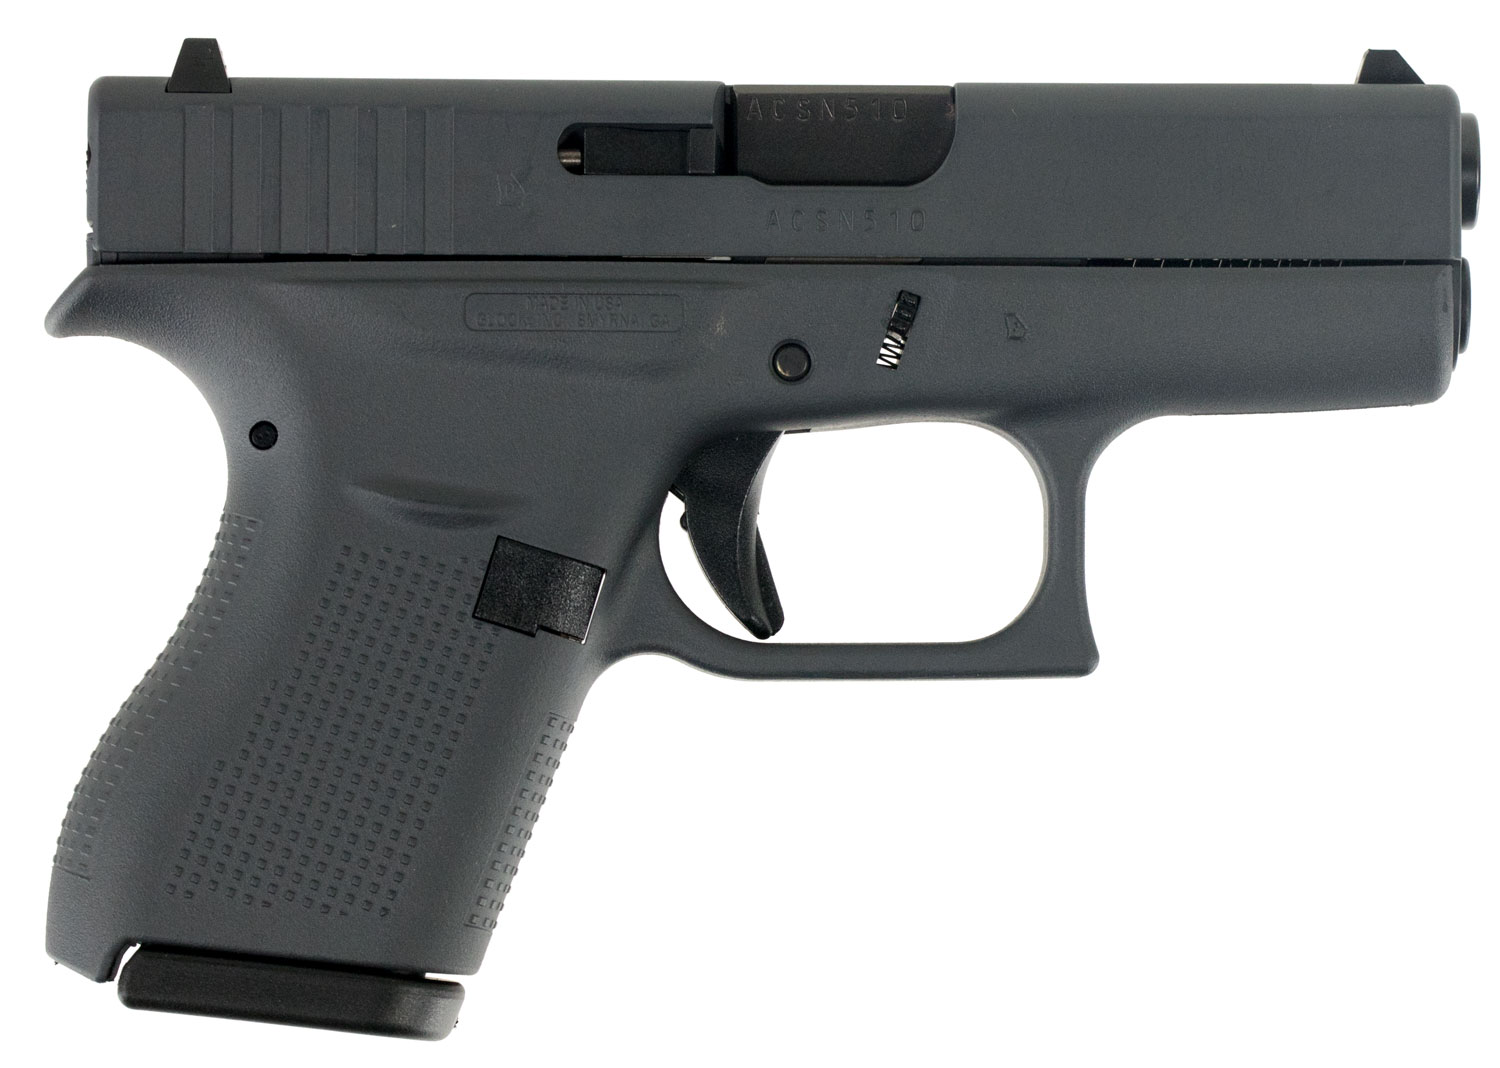 Glock UI4250201SNP G42 Subcompact Double 380 Automatic Colt Pistol ACP 3.25 Inch 61 Gray Polymer Grip/Frame Grip Gray | 682146001877